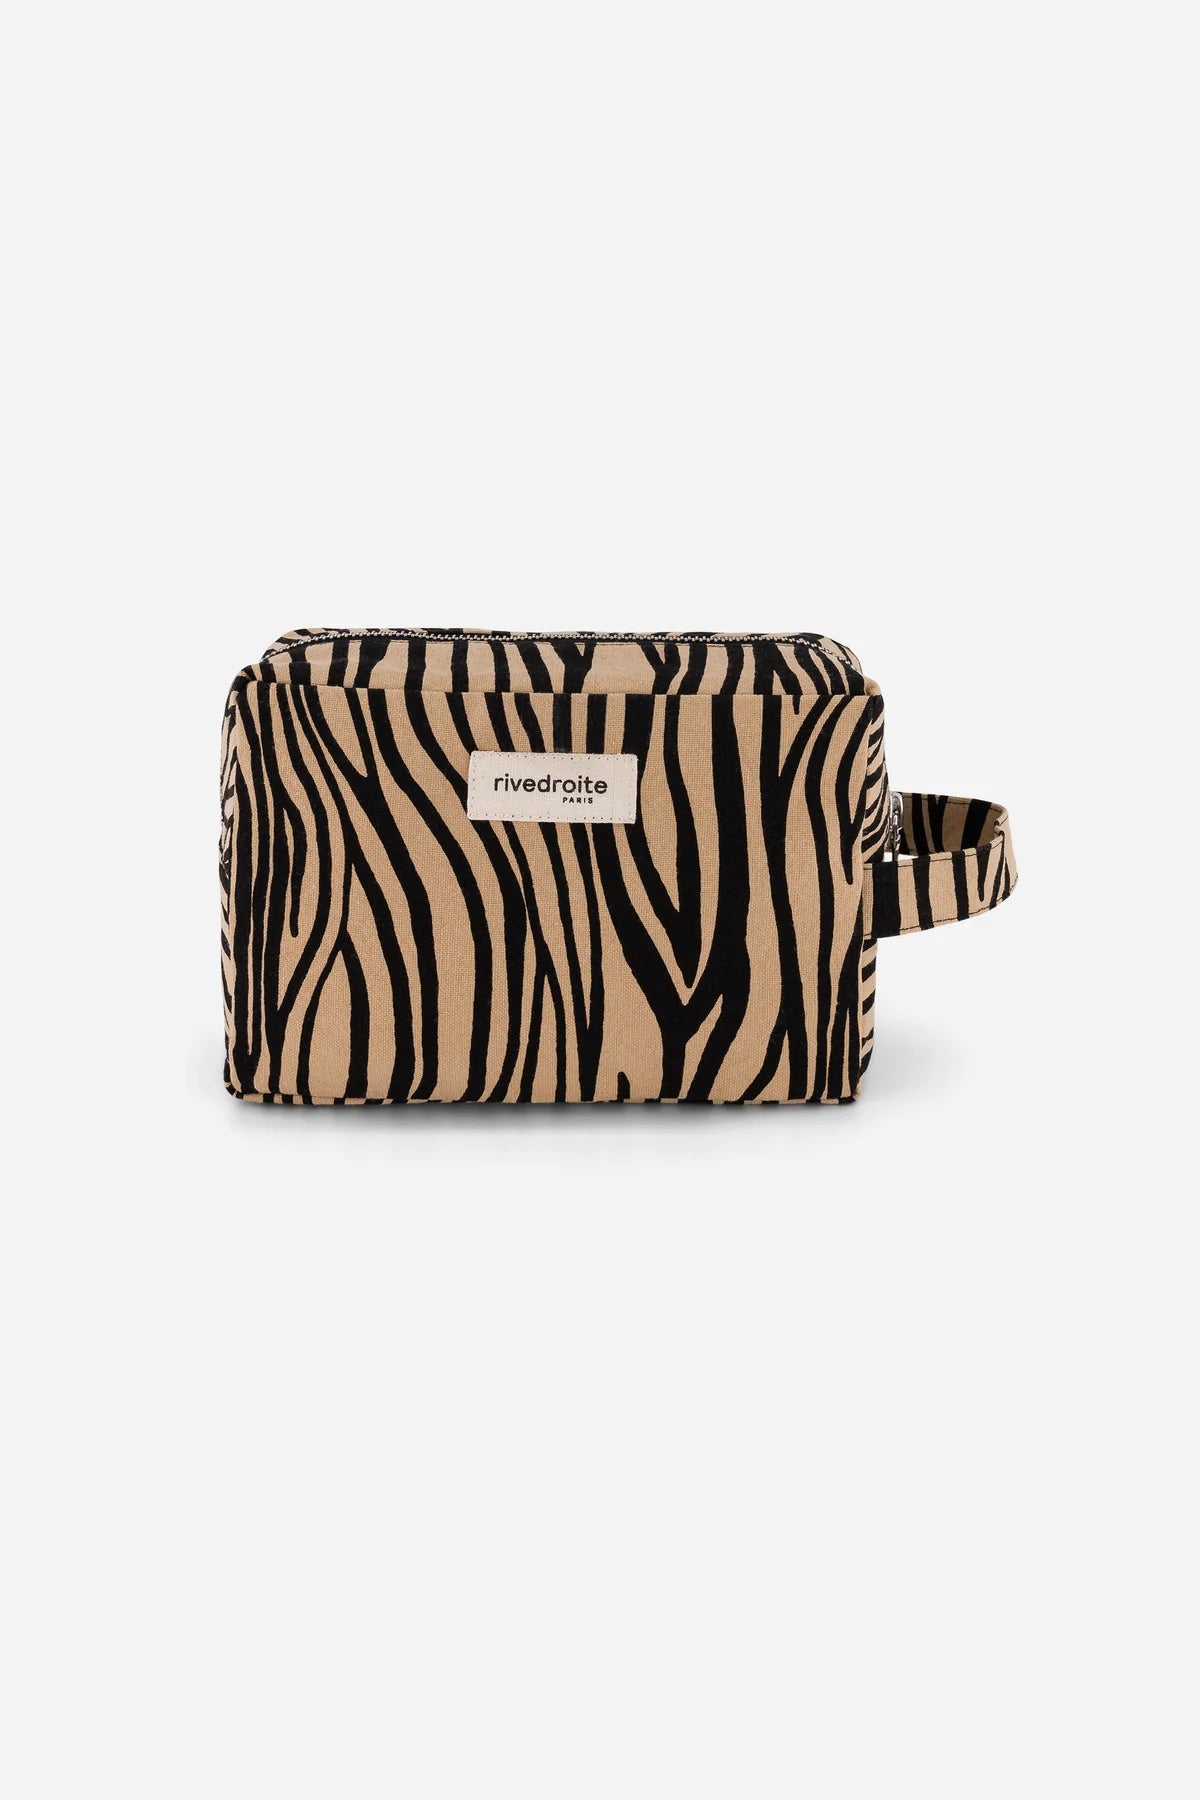 TOURNELLES XL THE POUCH | Recycled cotton Zebra